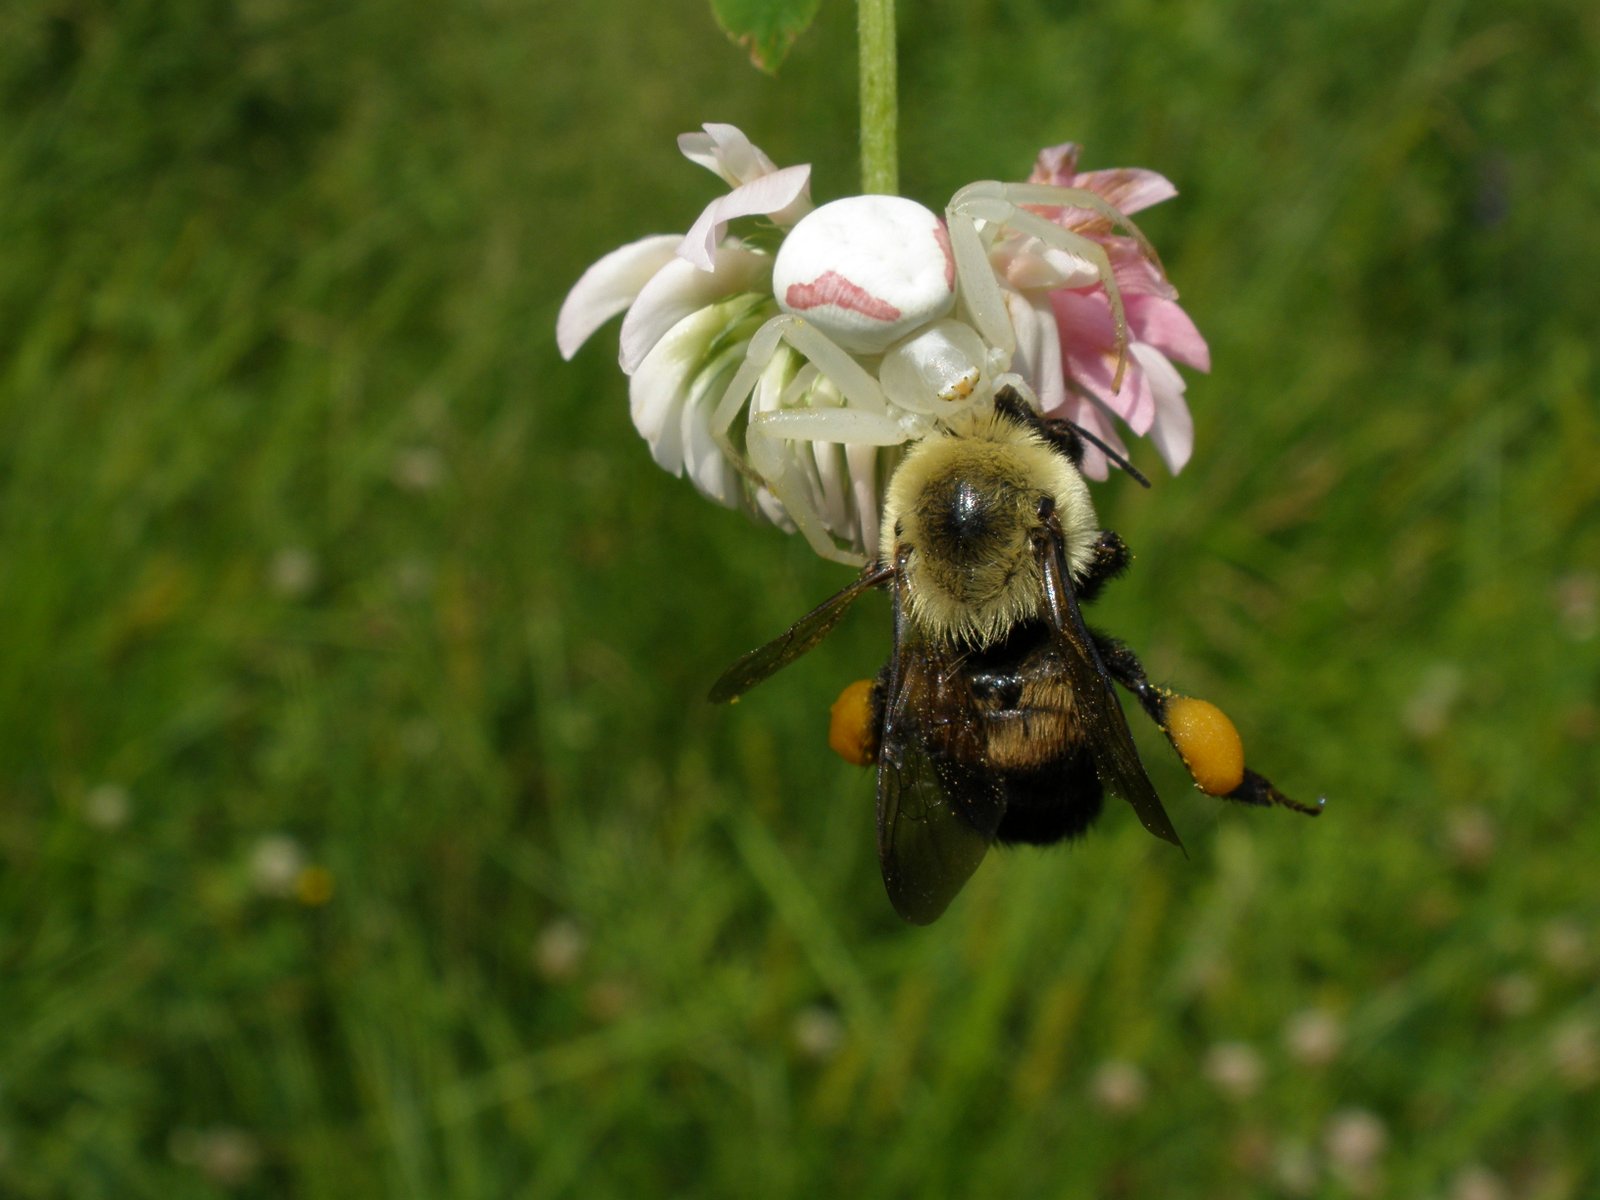 Brown-belted bumble bee (Bombus griseocollis) photo